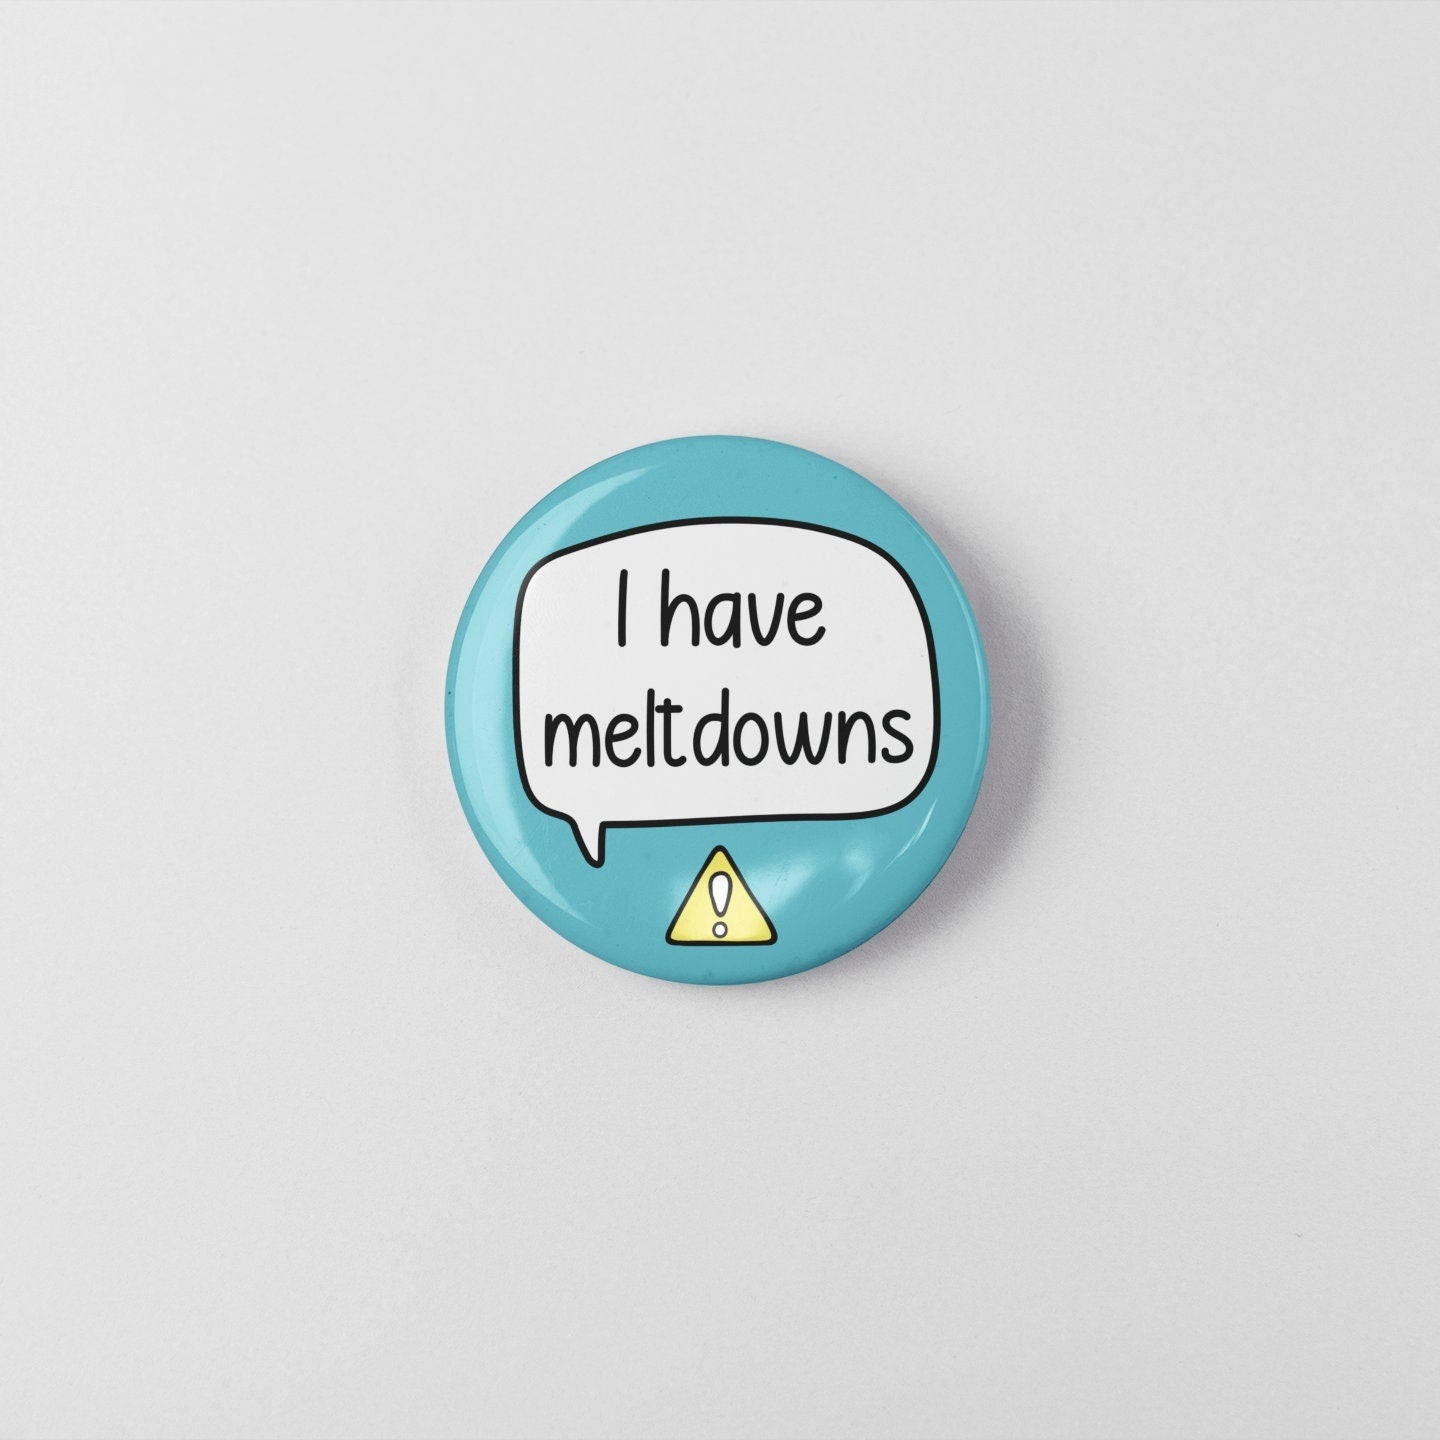 I Have Meltdowns Badge Pin / Autism ADHD Disability